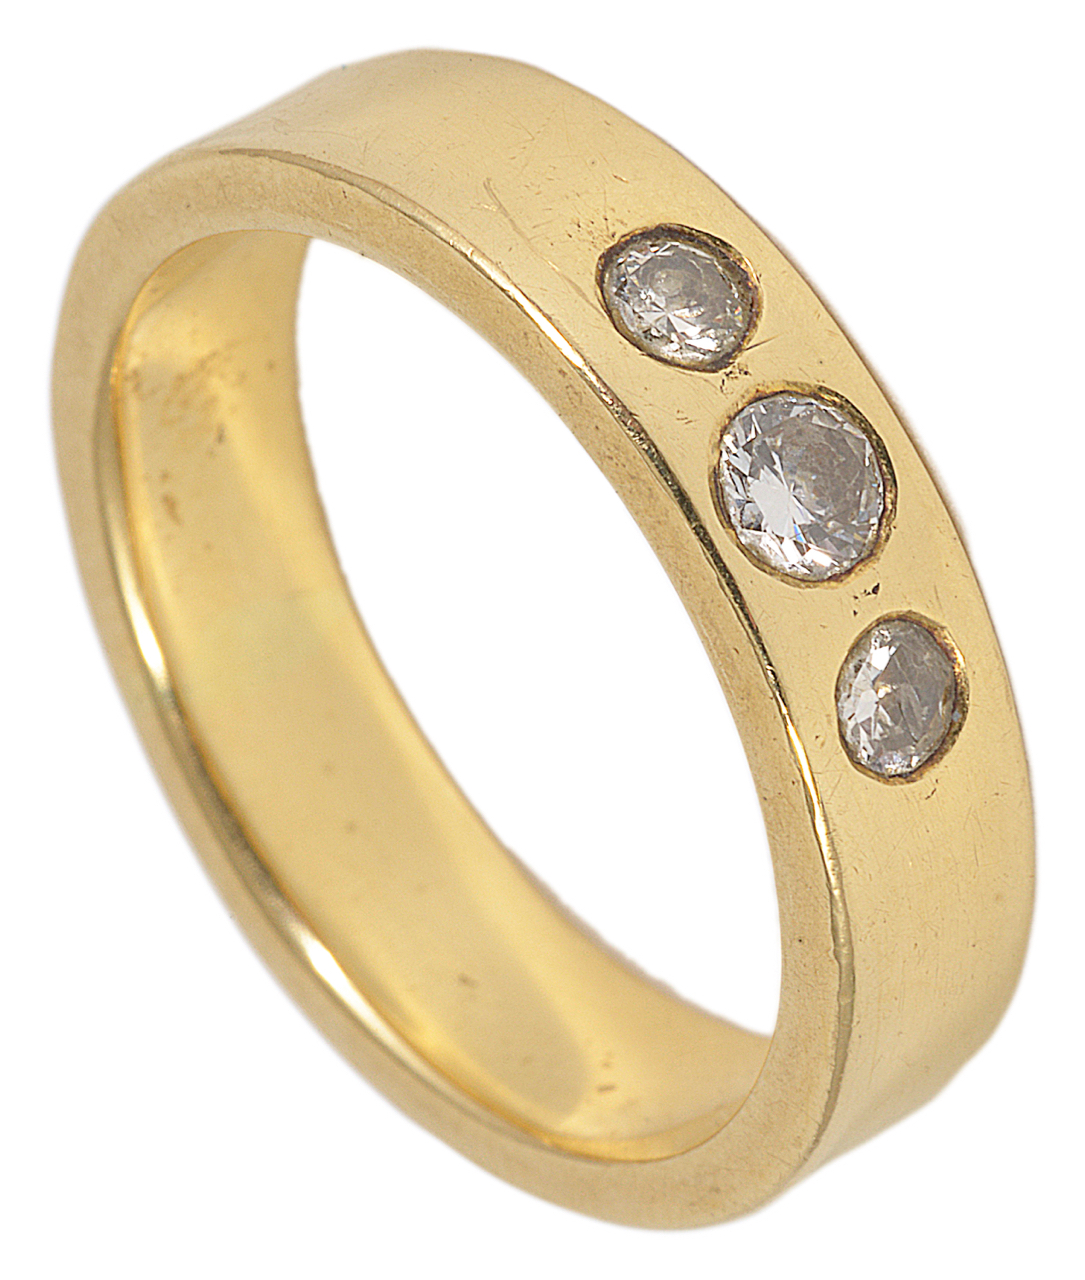 A simple heavy yellow metal band ring set with three small central diamonds the diamonds in a sunken